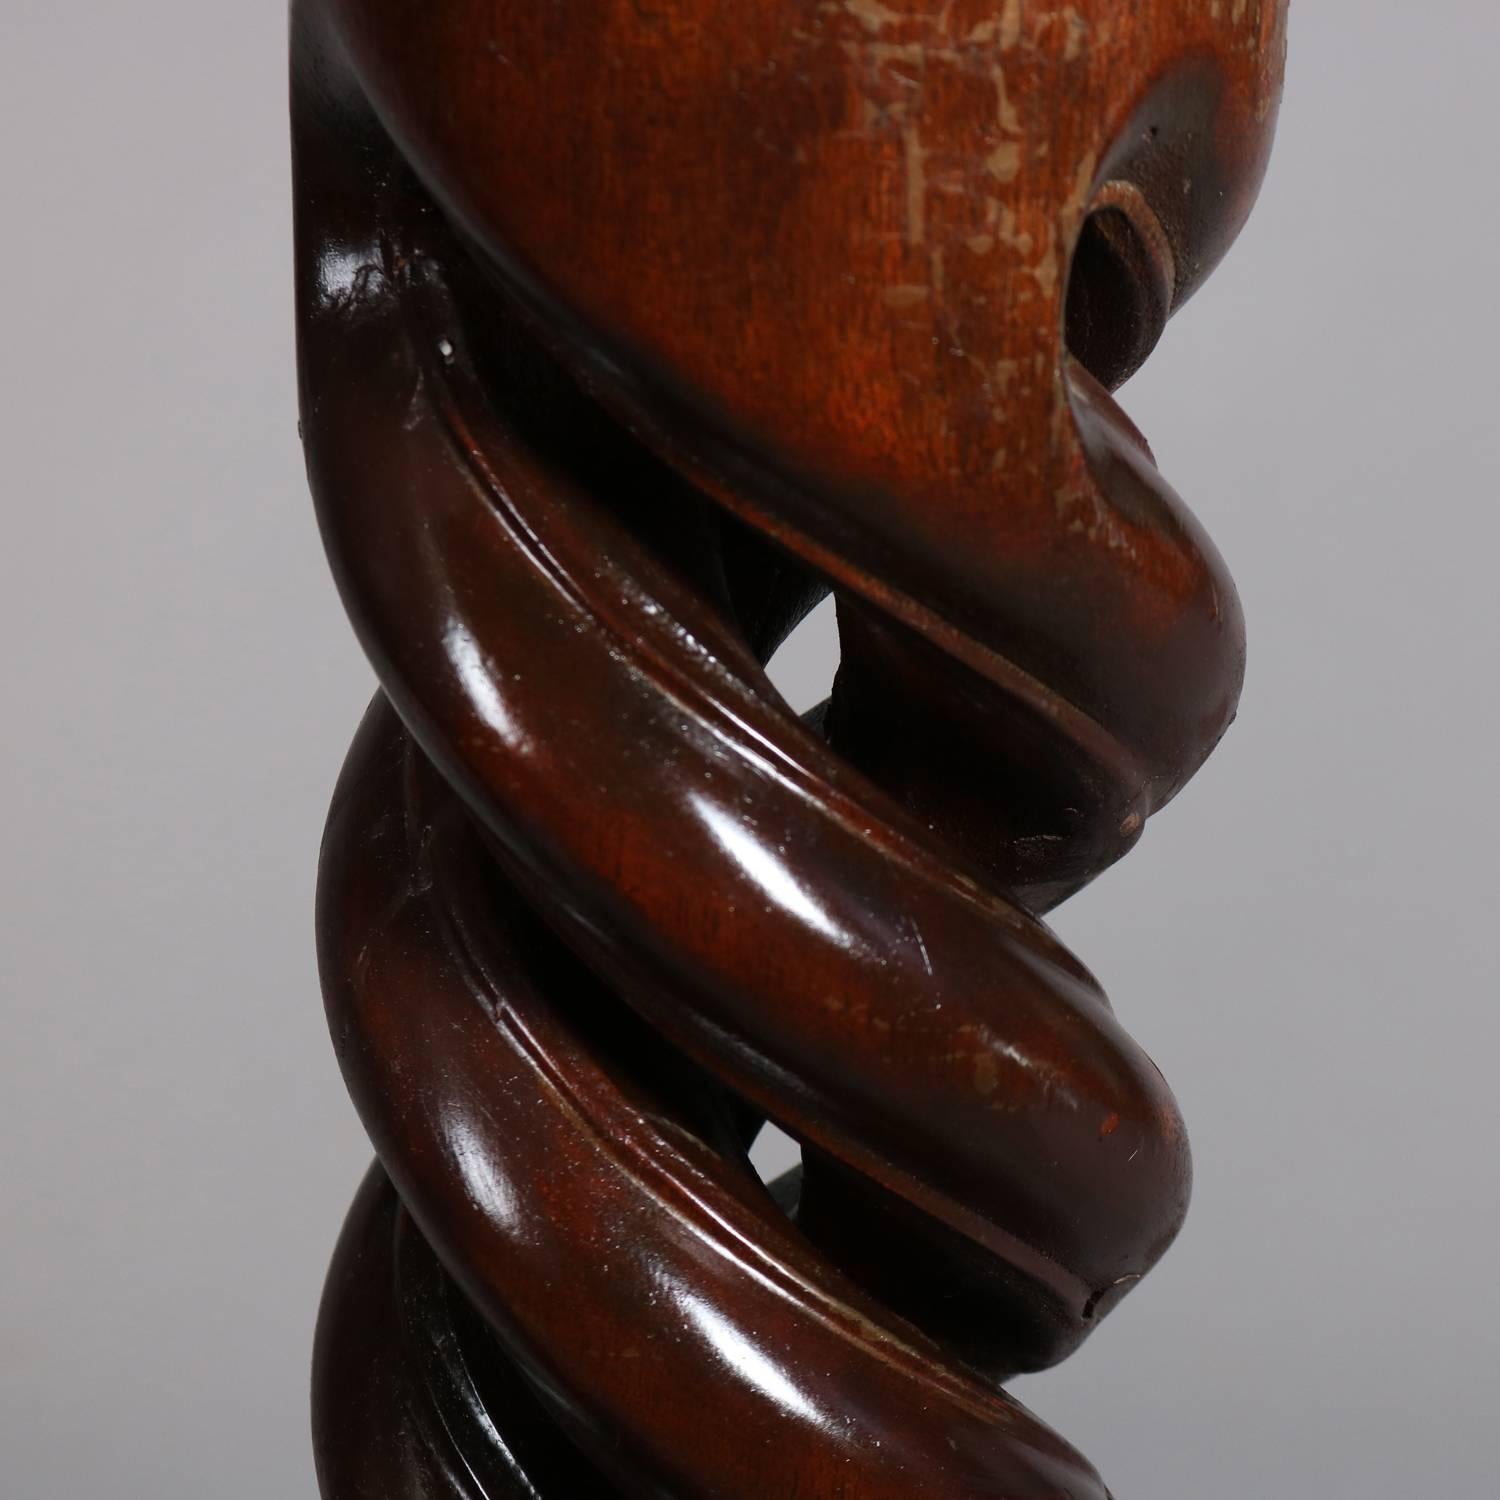 Pair of neoclassical mahogany display pedestals feature heavily carved open barley twist shaft with carved palmette and egg-and-dart at headers and footers, 20th century

Measure: 42